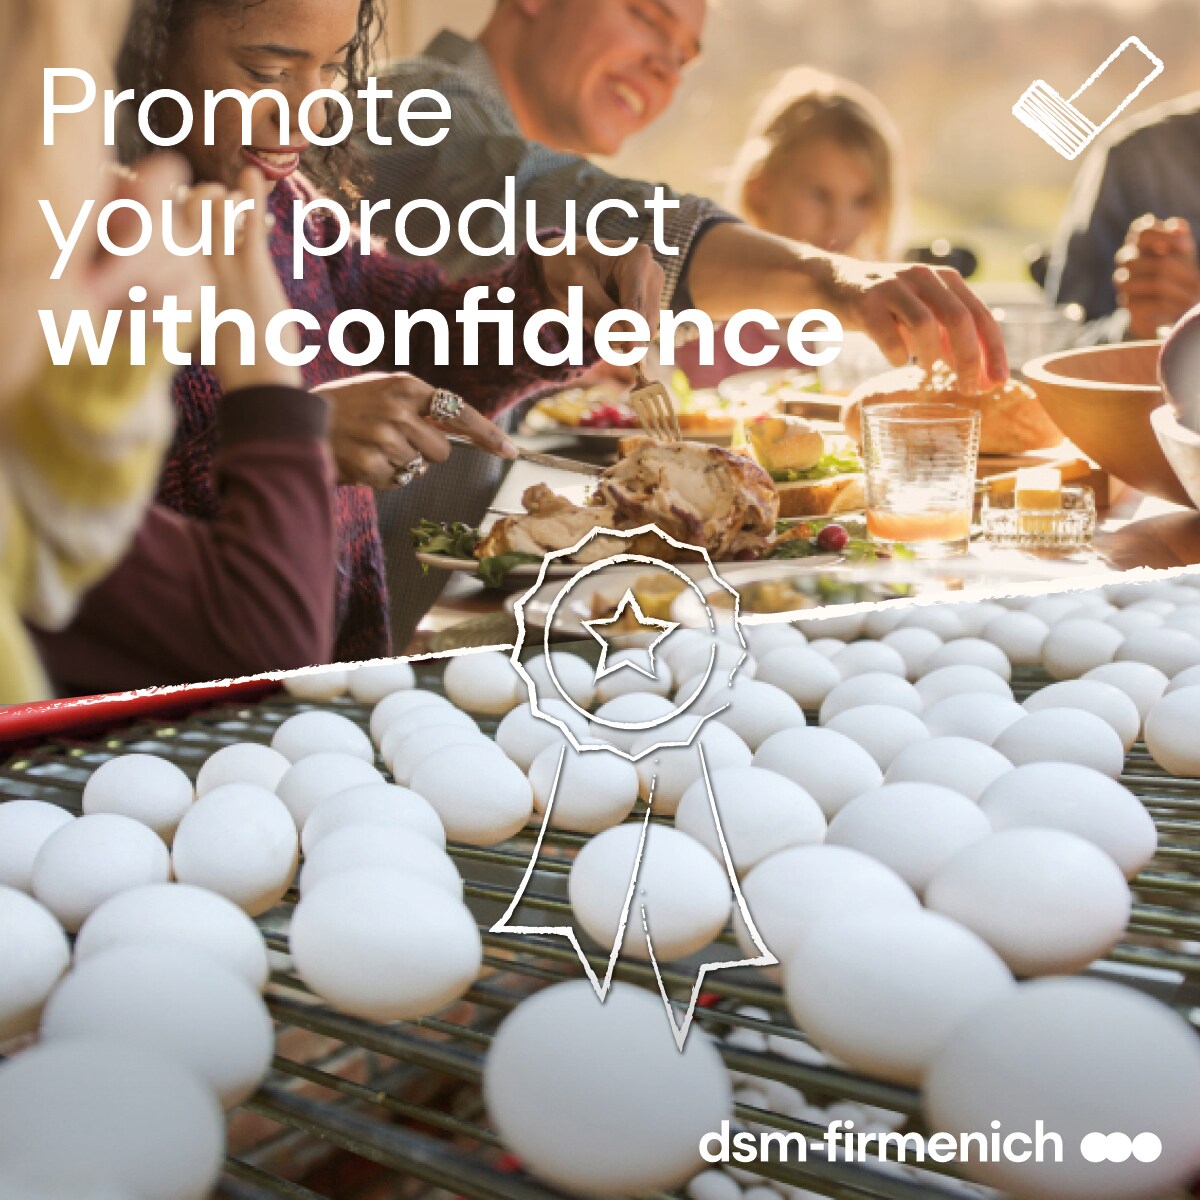 Protect your product with confidence